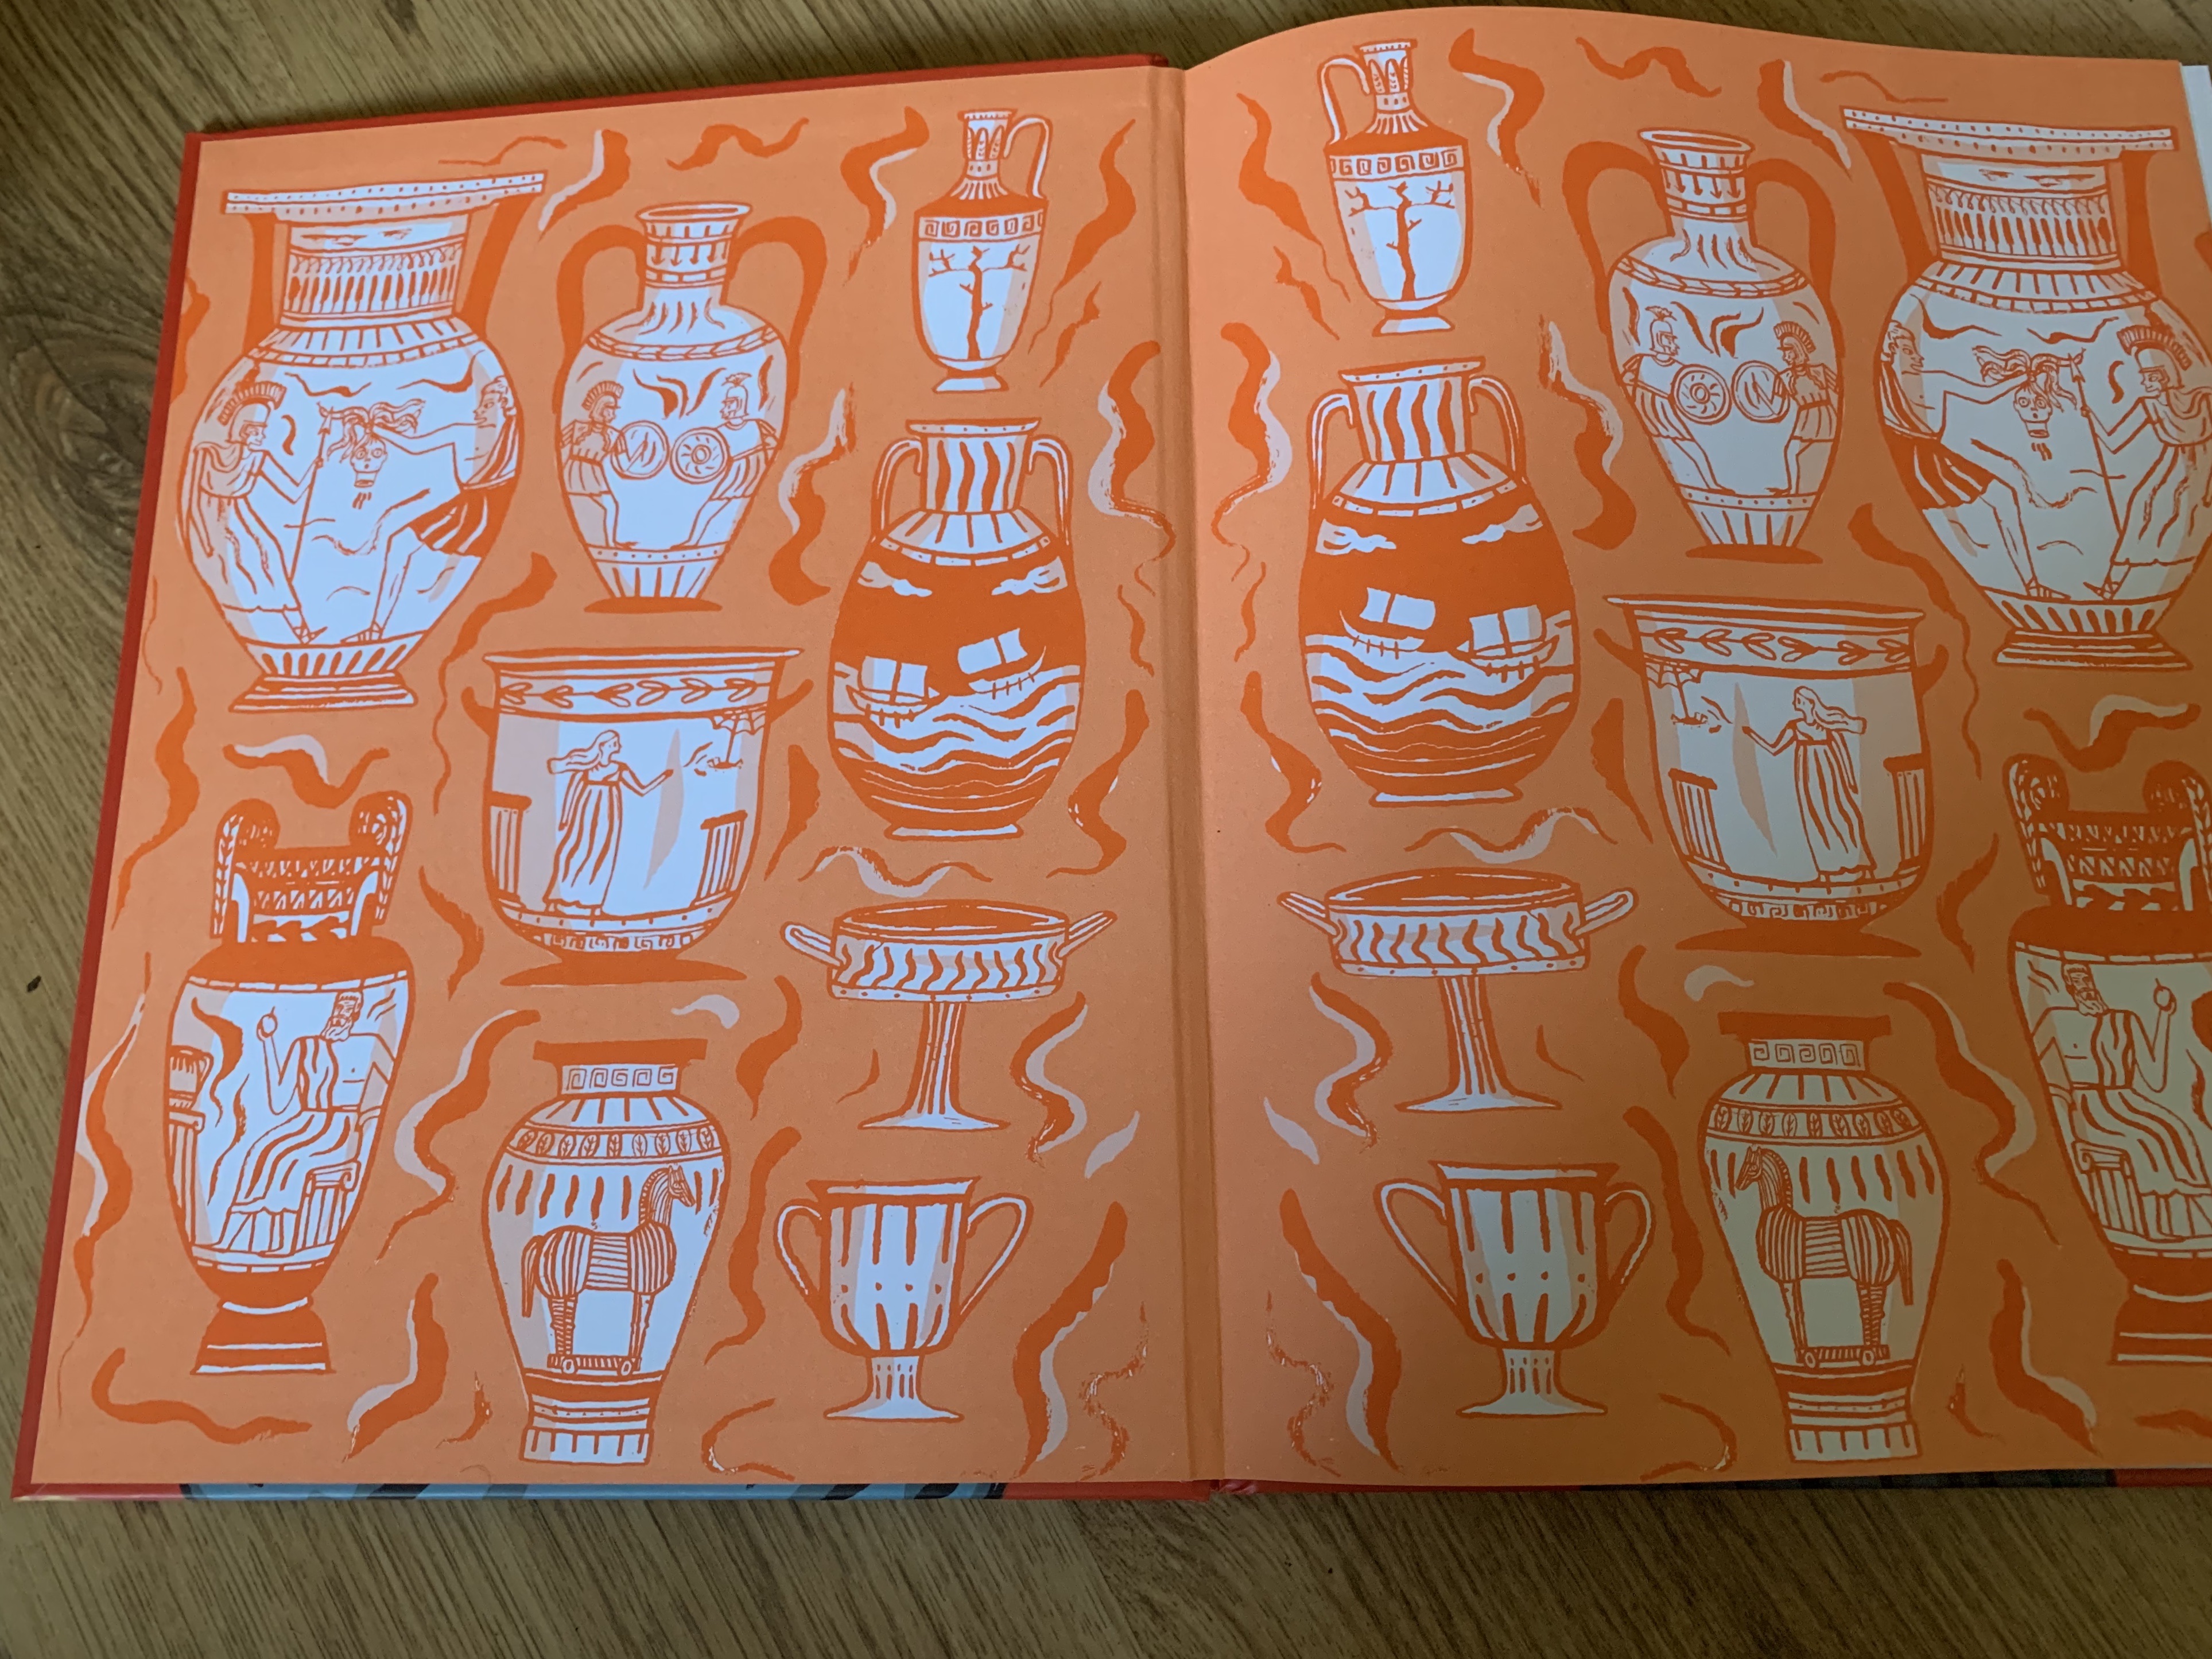 Image from endpapers